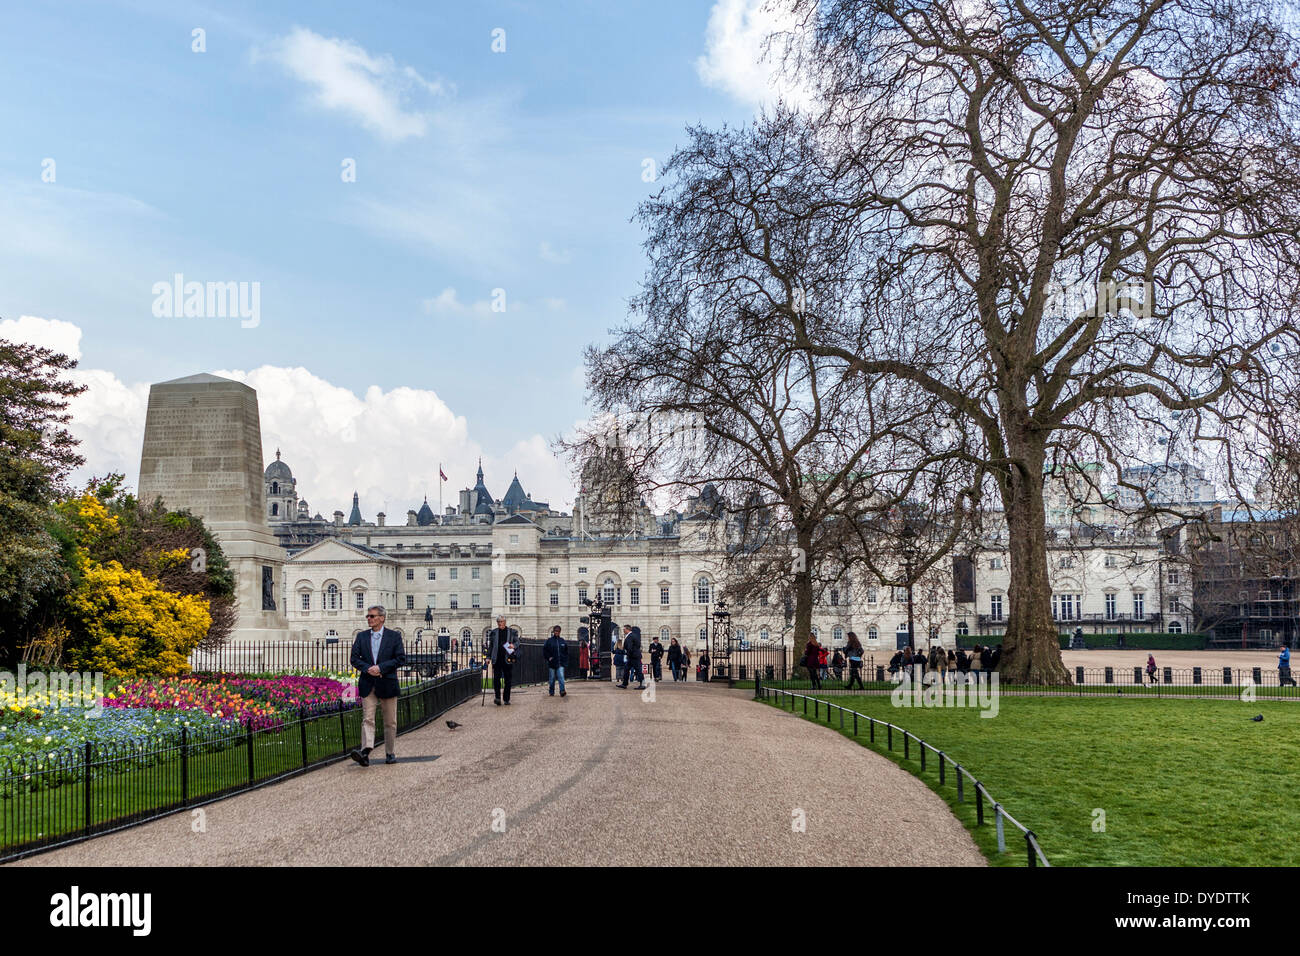 St. James's park, Guards Division Memorial and Horse Guards Parade,  Horse Guards Road, London, UK Stock Photo